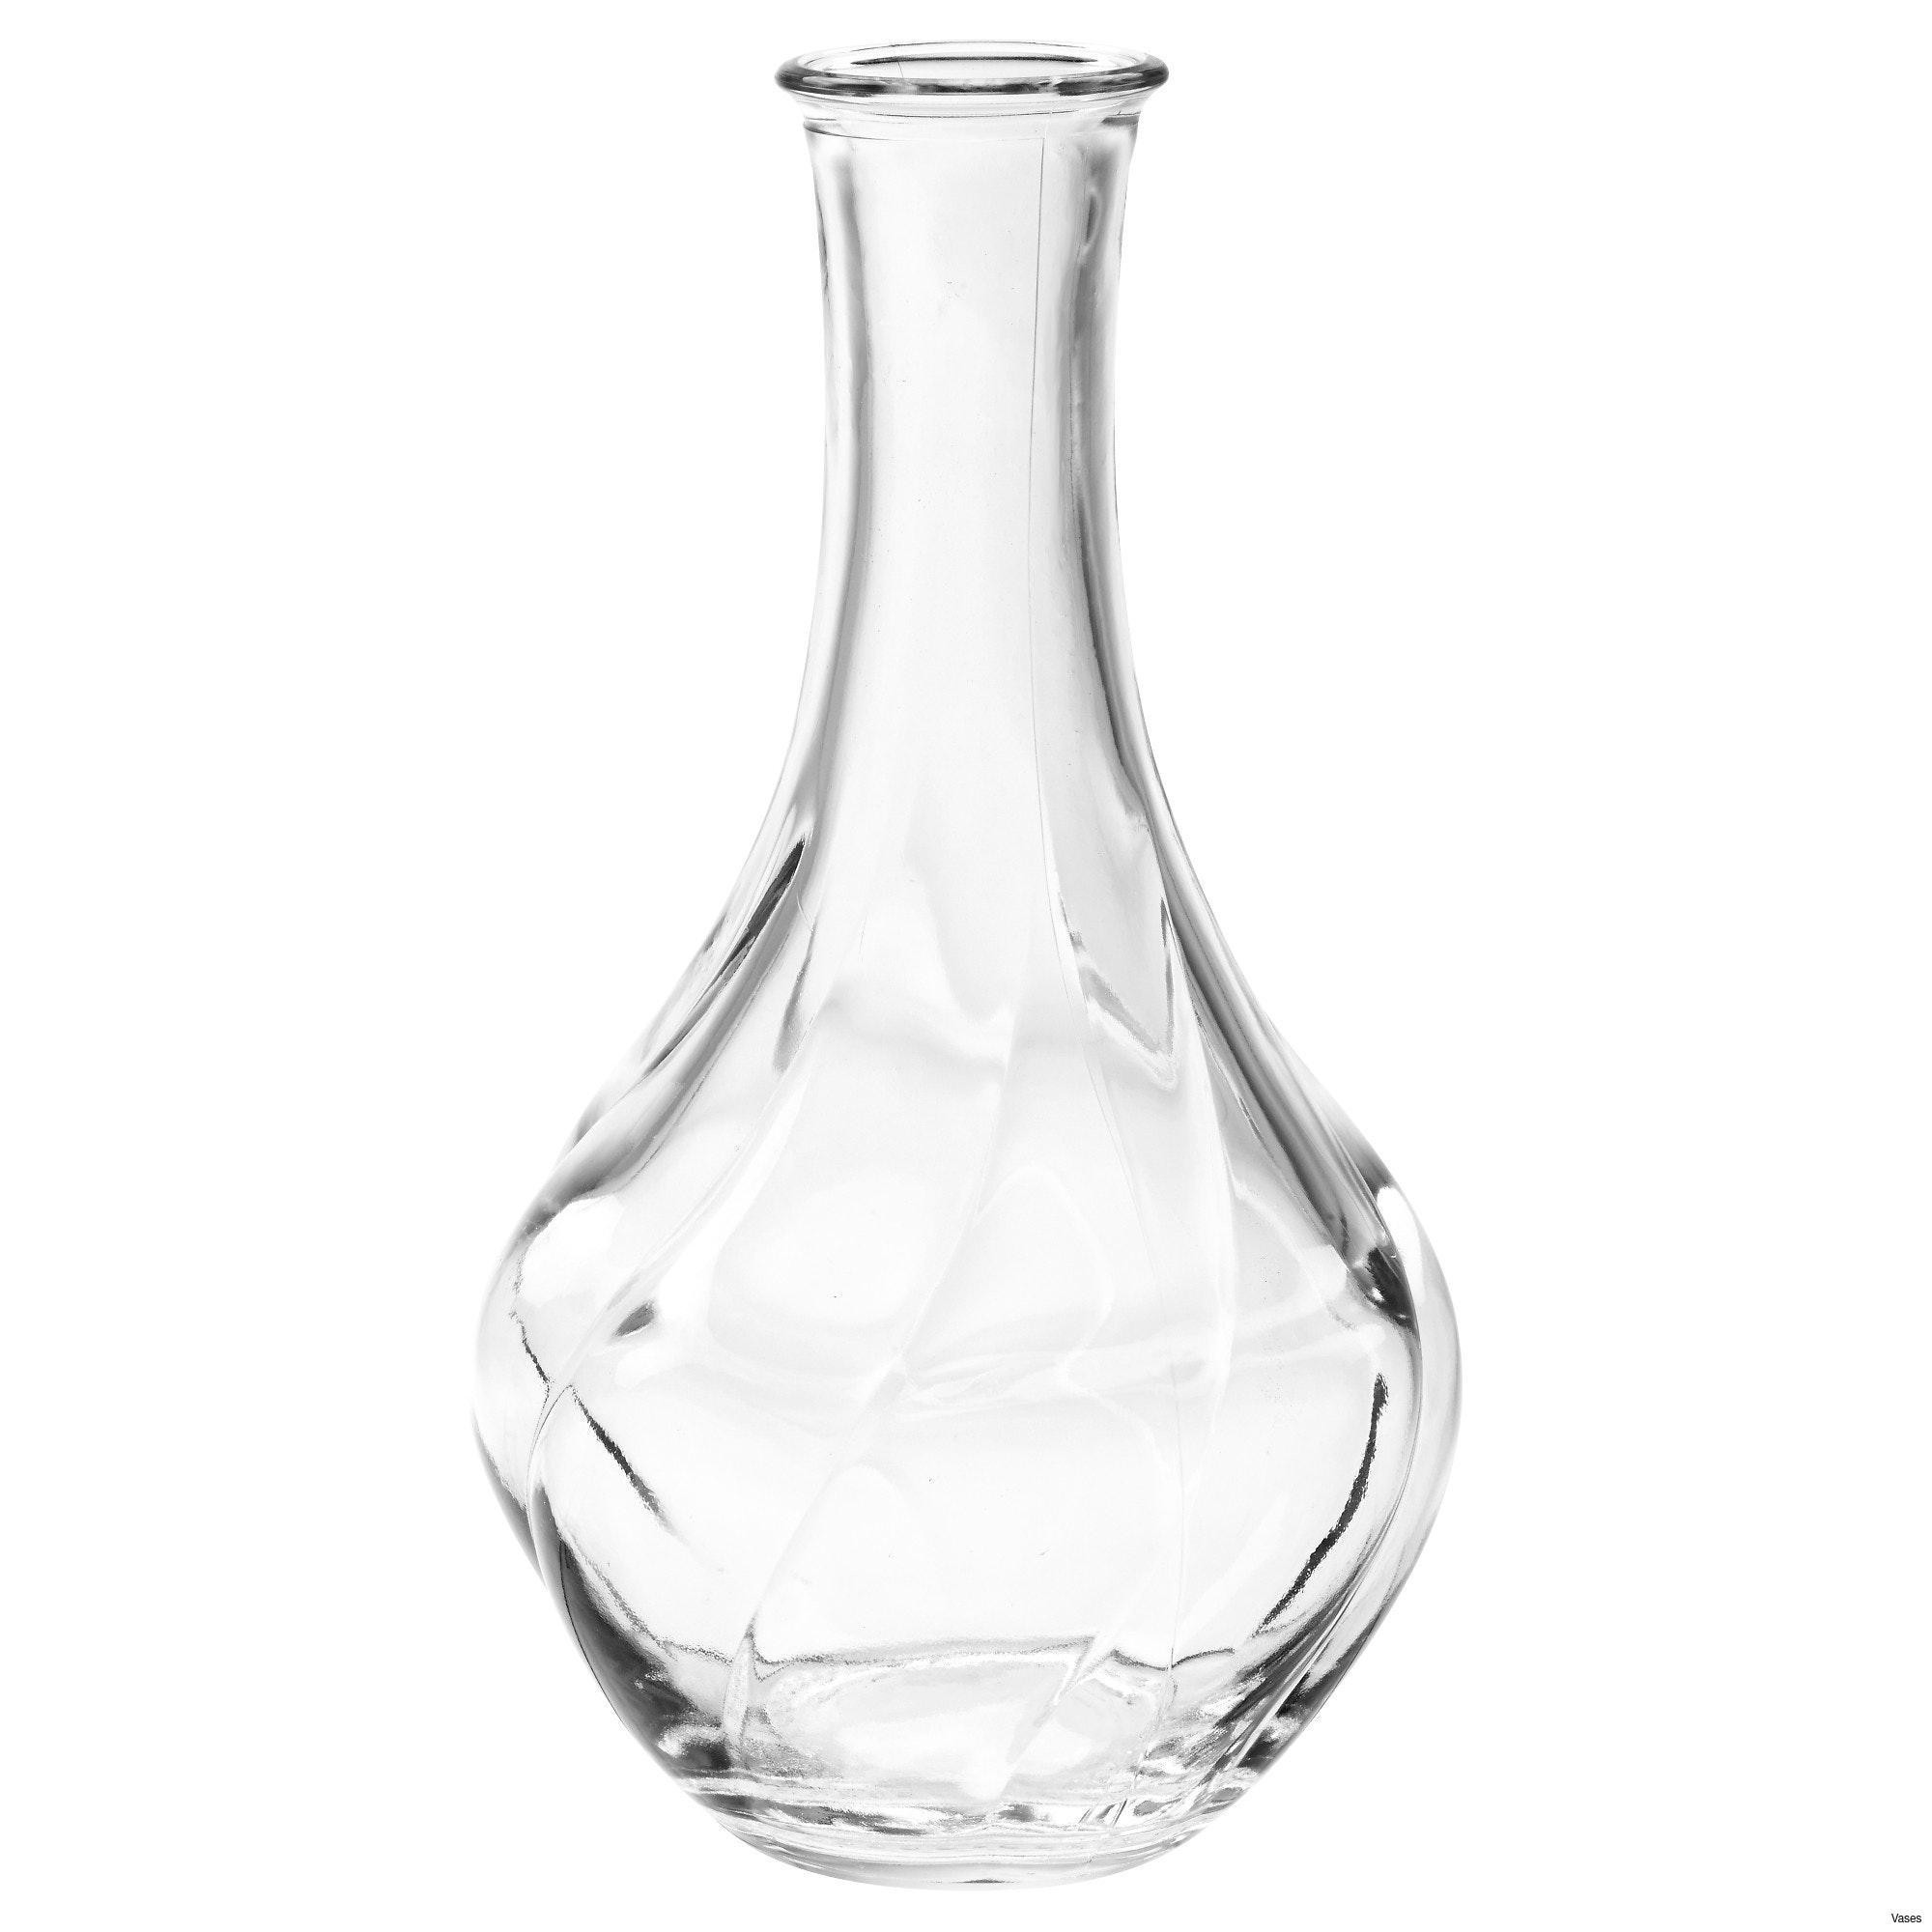 tall floor vases amazon of collection of extra large glass vase vases artificial plants with extra large glass vase image living room glass vases fresh clear vase 0d tags amazing and